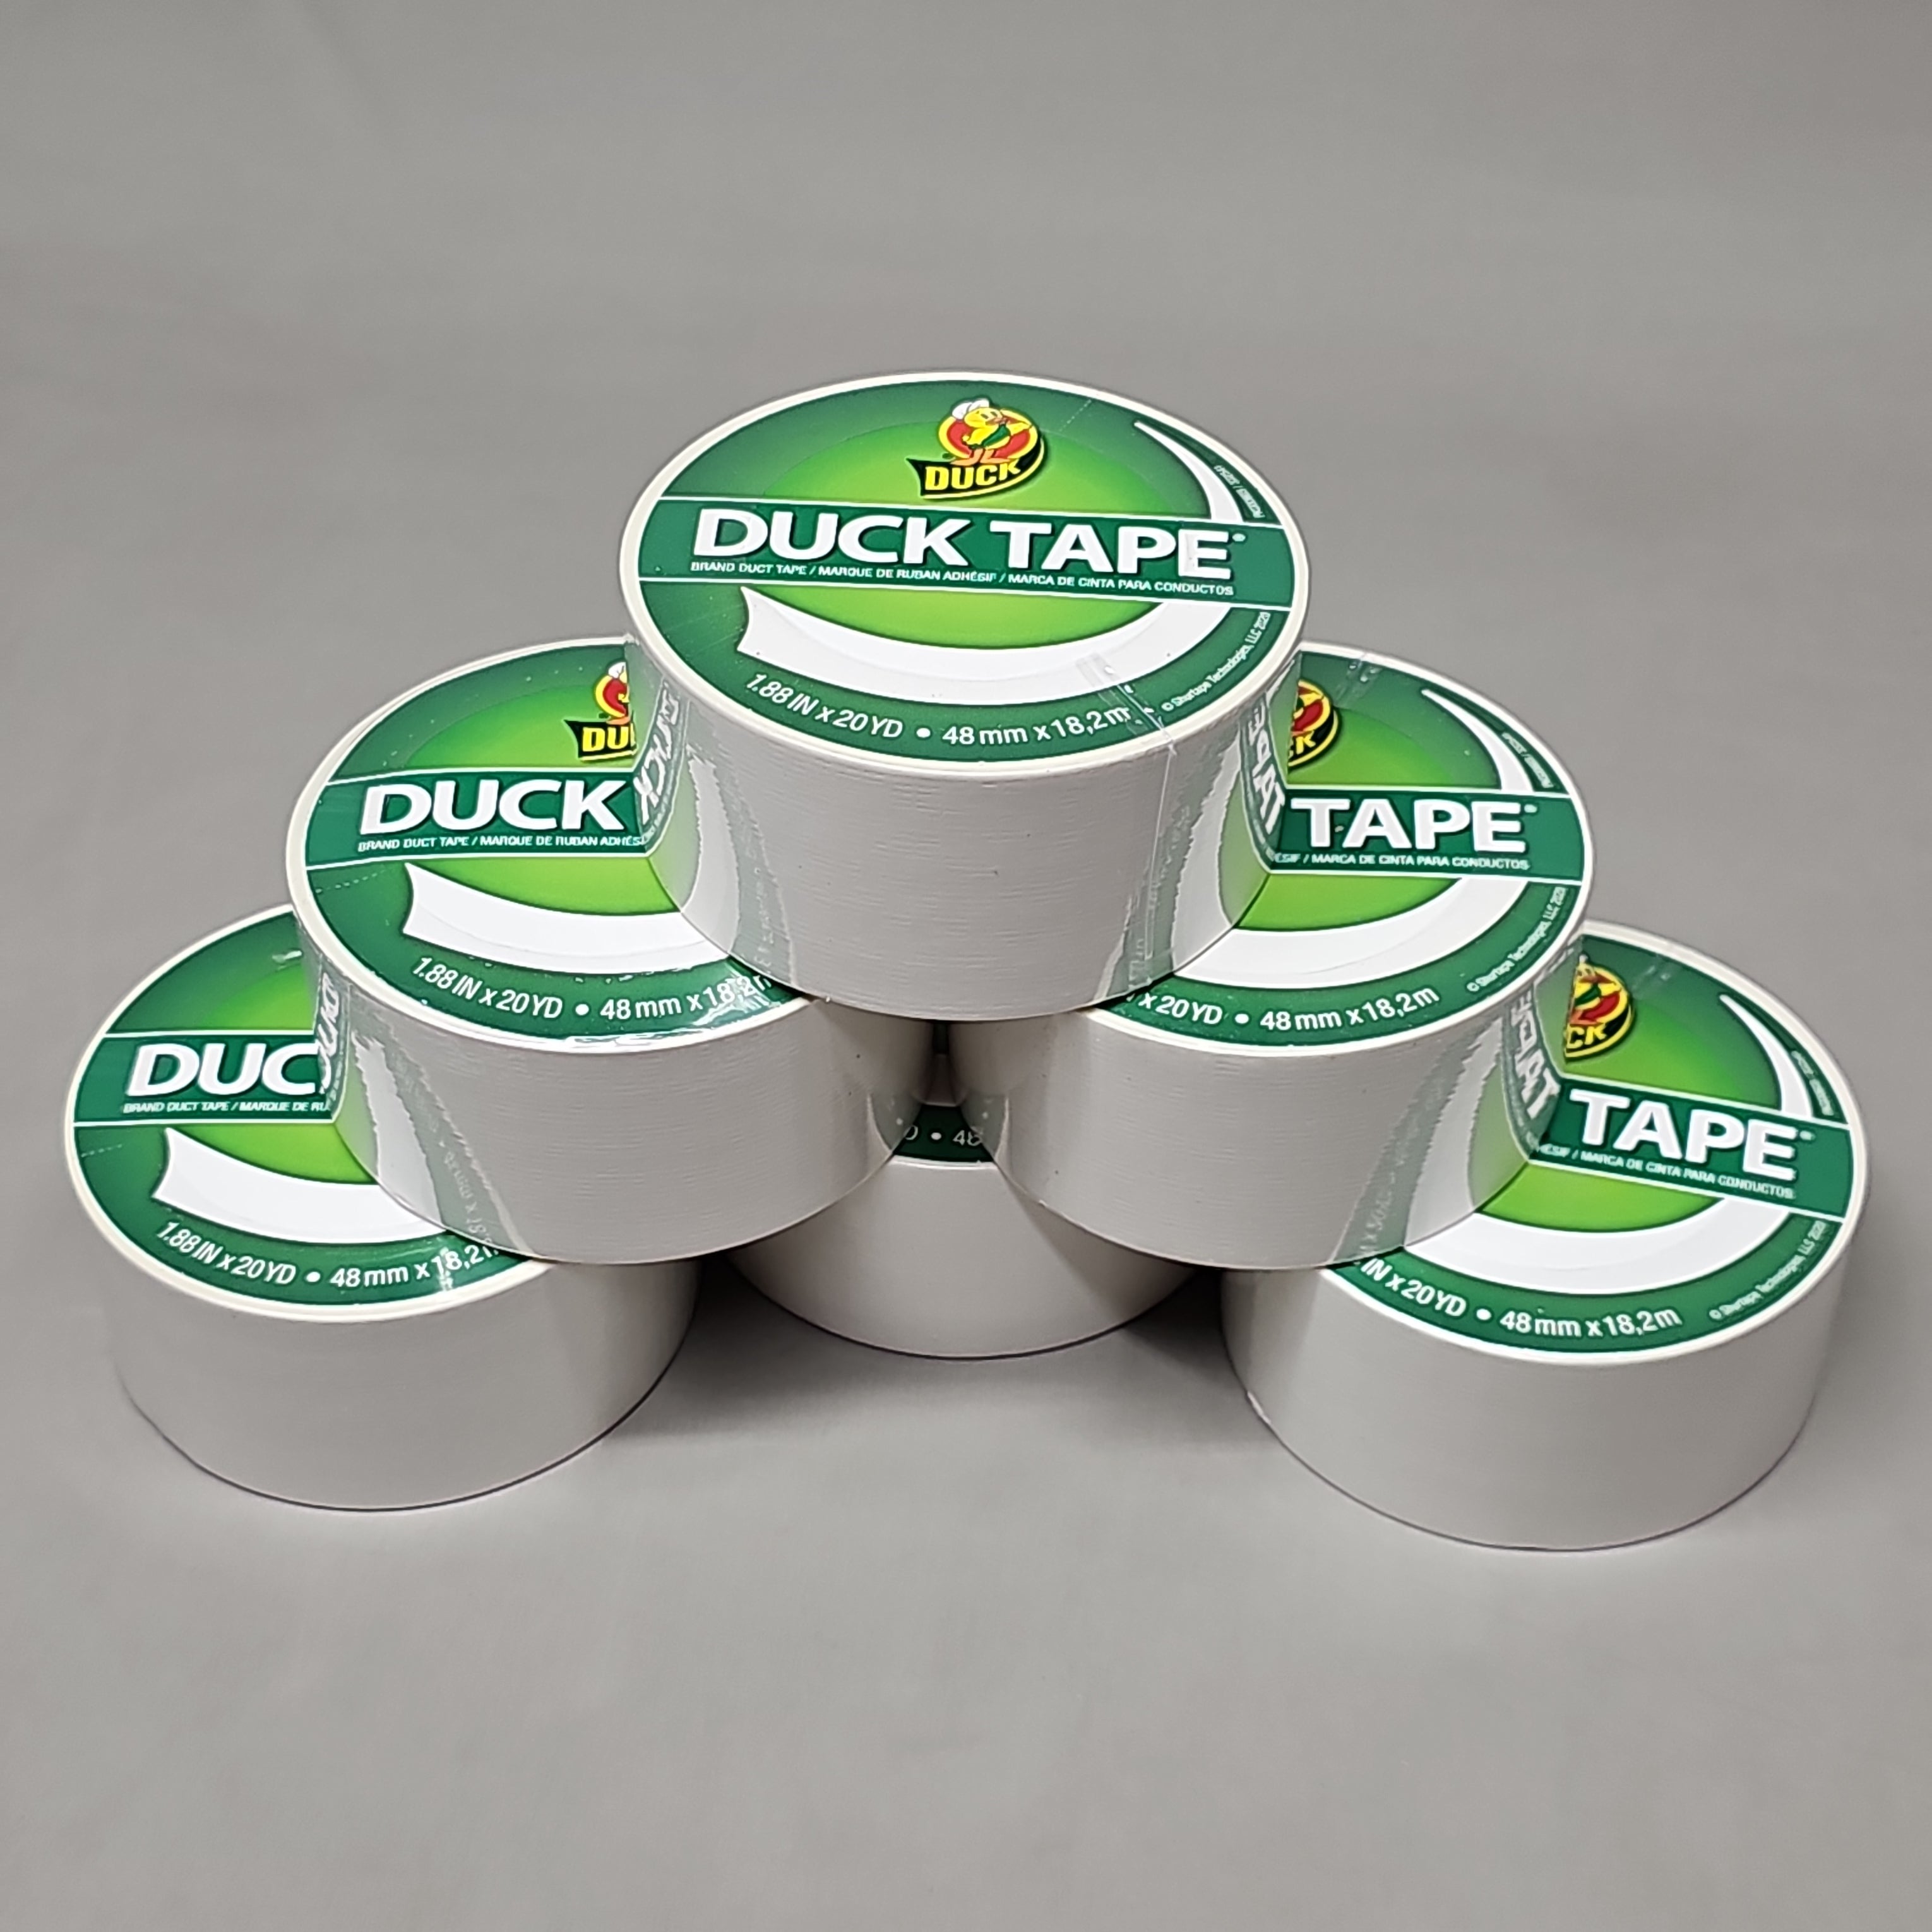 SHURTAPE DUCK TAPE 6 Rolls of White Duct Tape 1.88 X 20 YD 283871 – PayWut